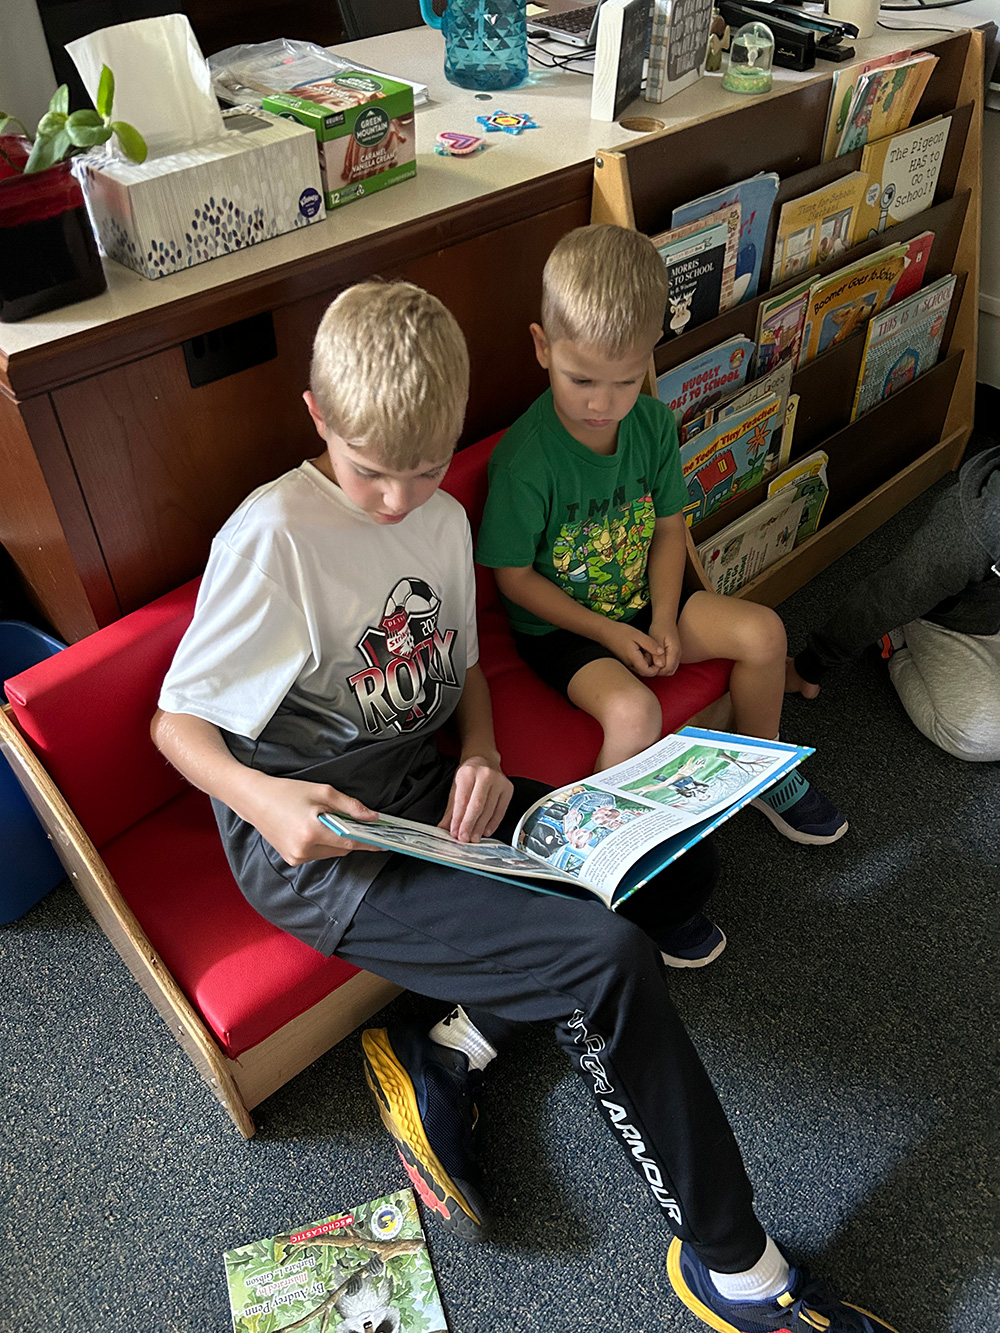 Two young children sit together on a small red couch. The older child, dressed in a white sports shirt and dark pants, reads a book to the younger child in a green shirt. Behind them is a bookshelf filled with a variety of colorful books.